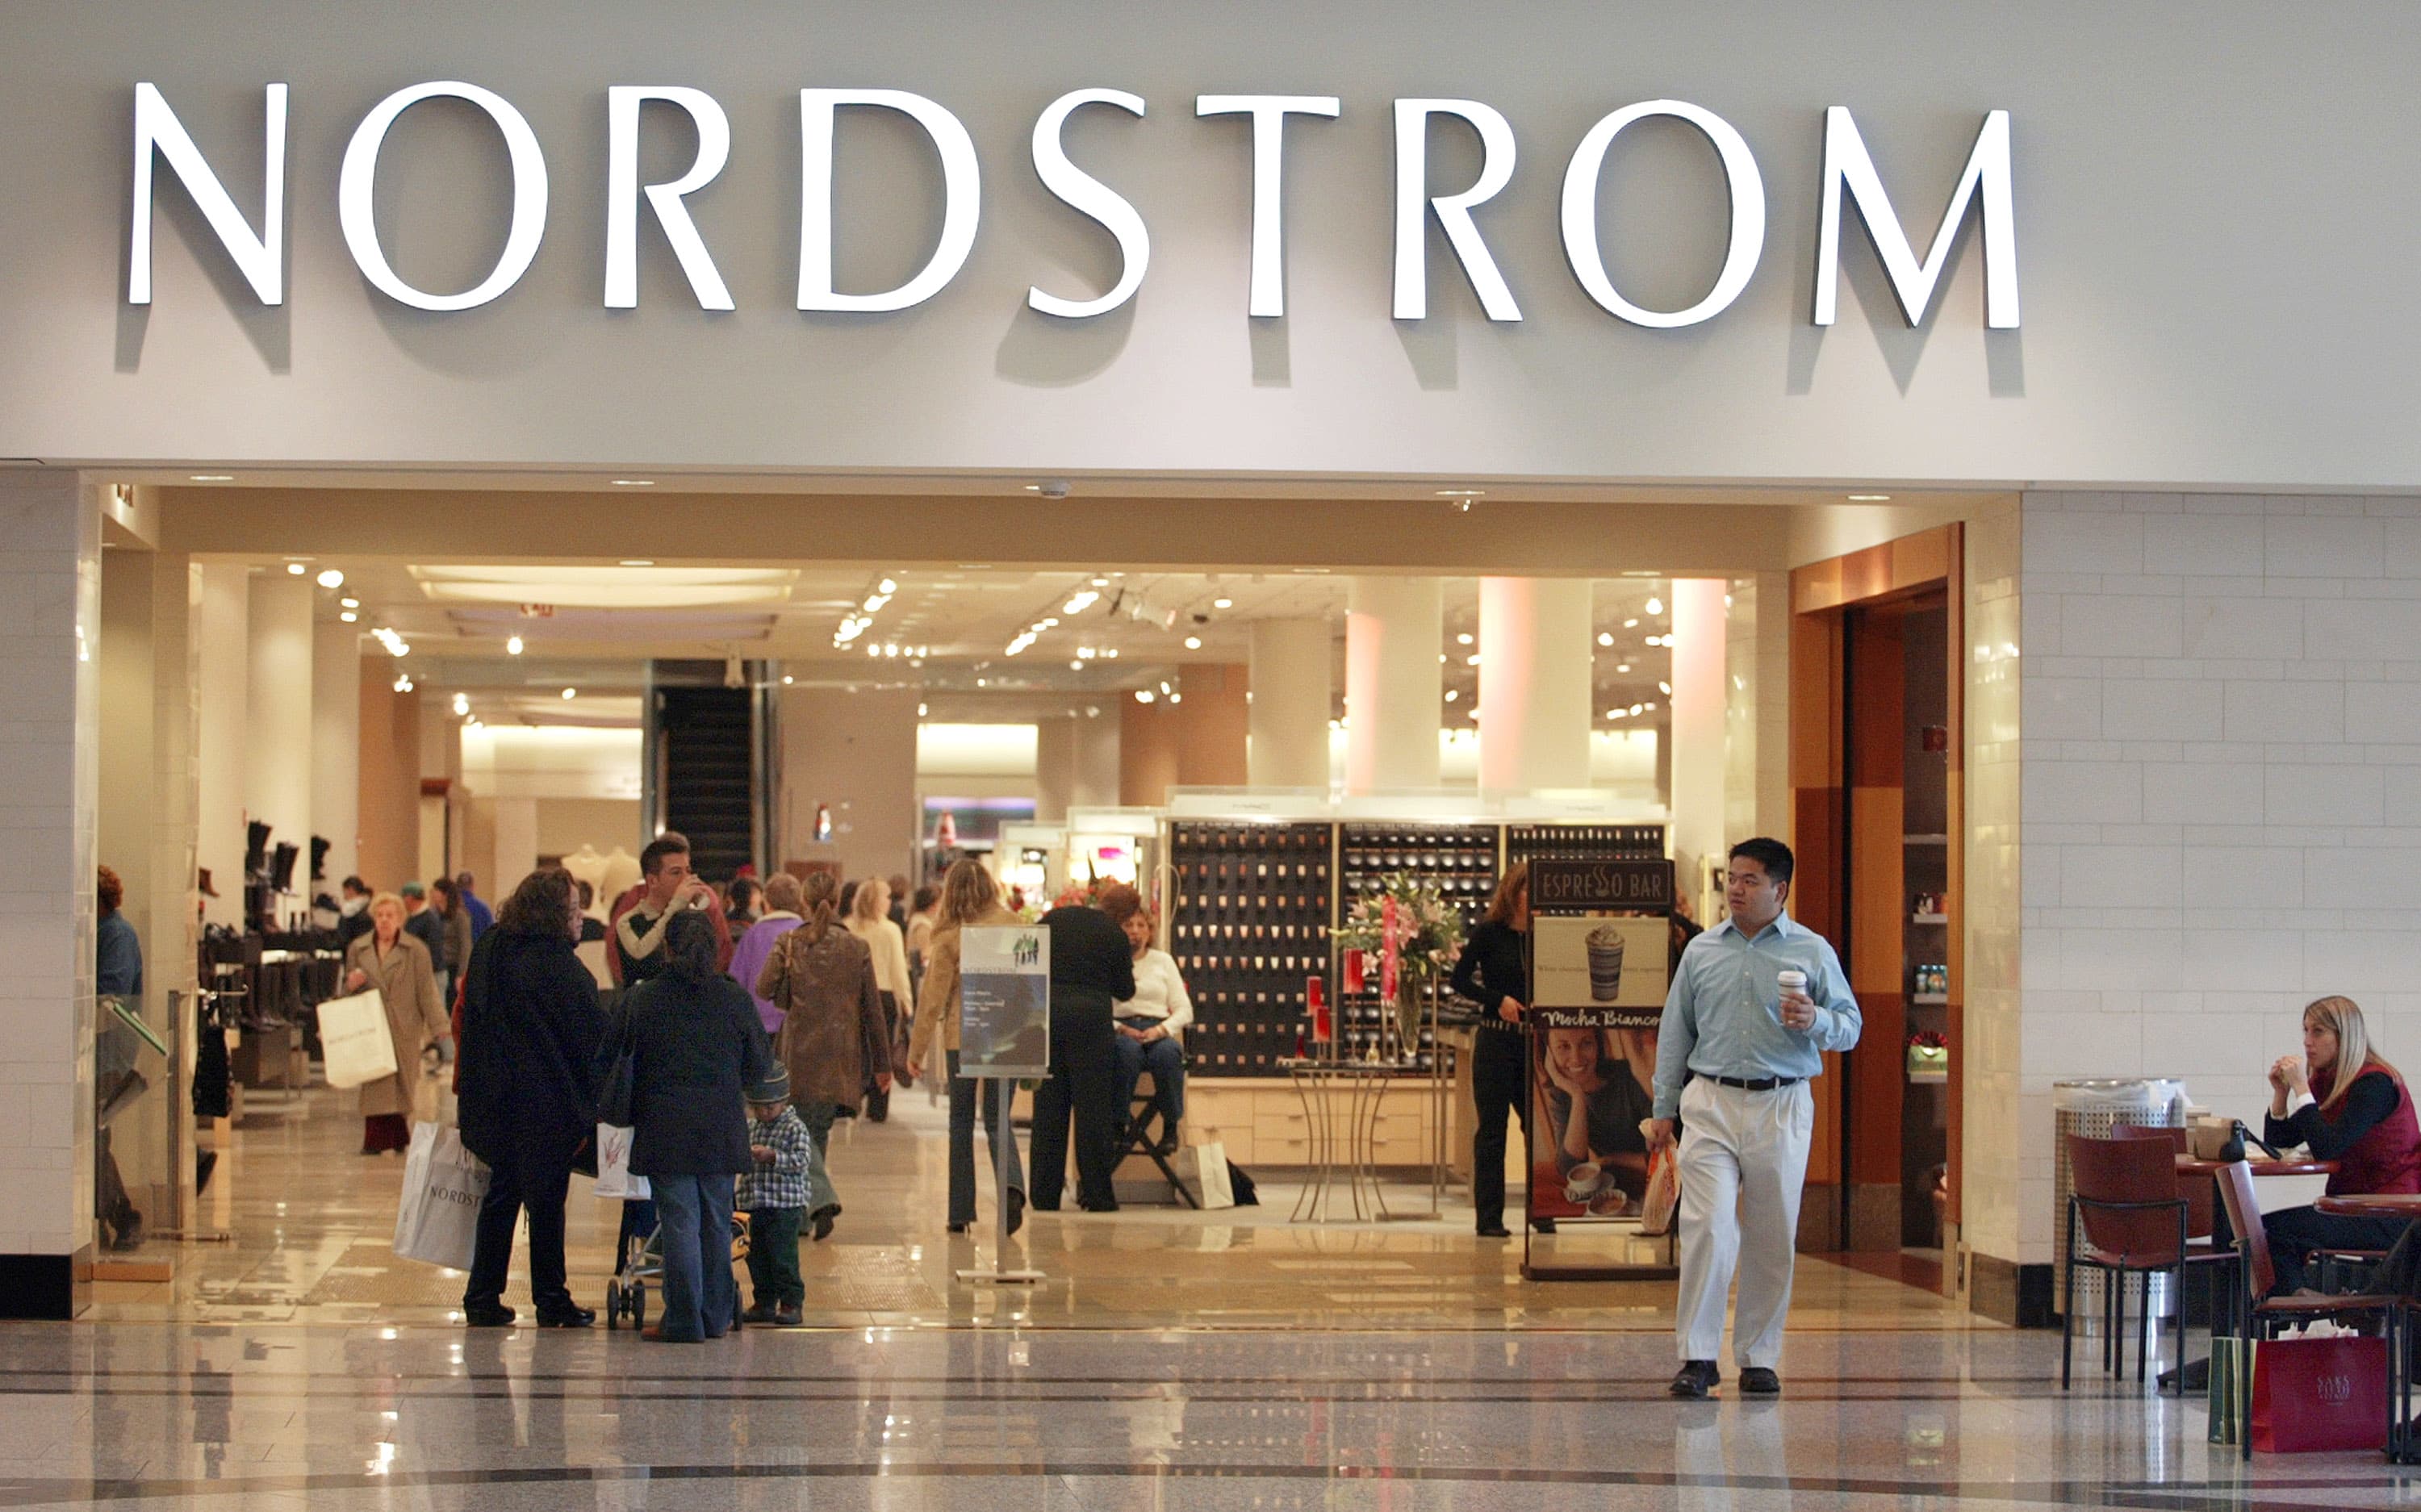 Nordstrom shares soar as the department store chain makes ‘baby steps.’ But it still has a ways to go